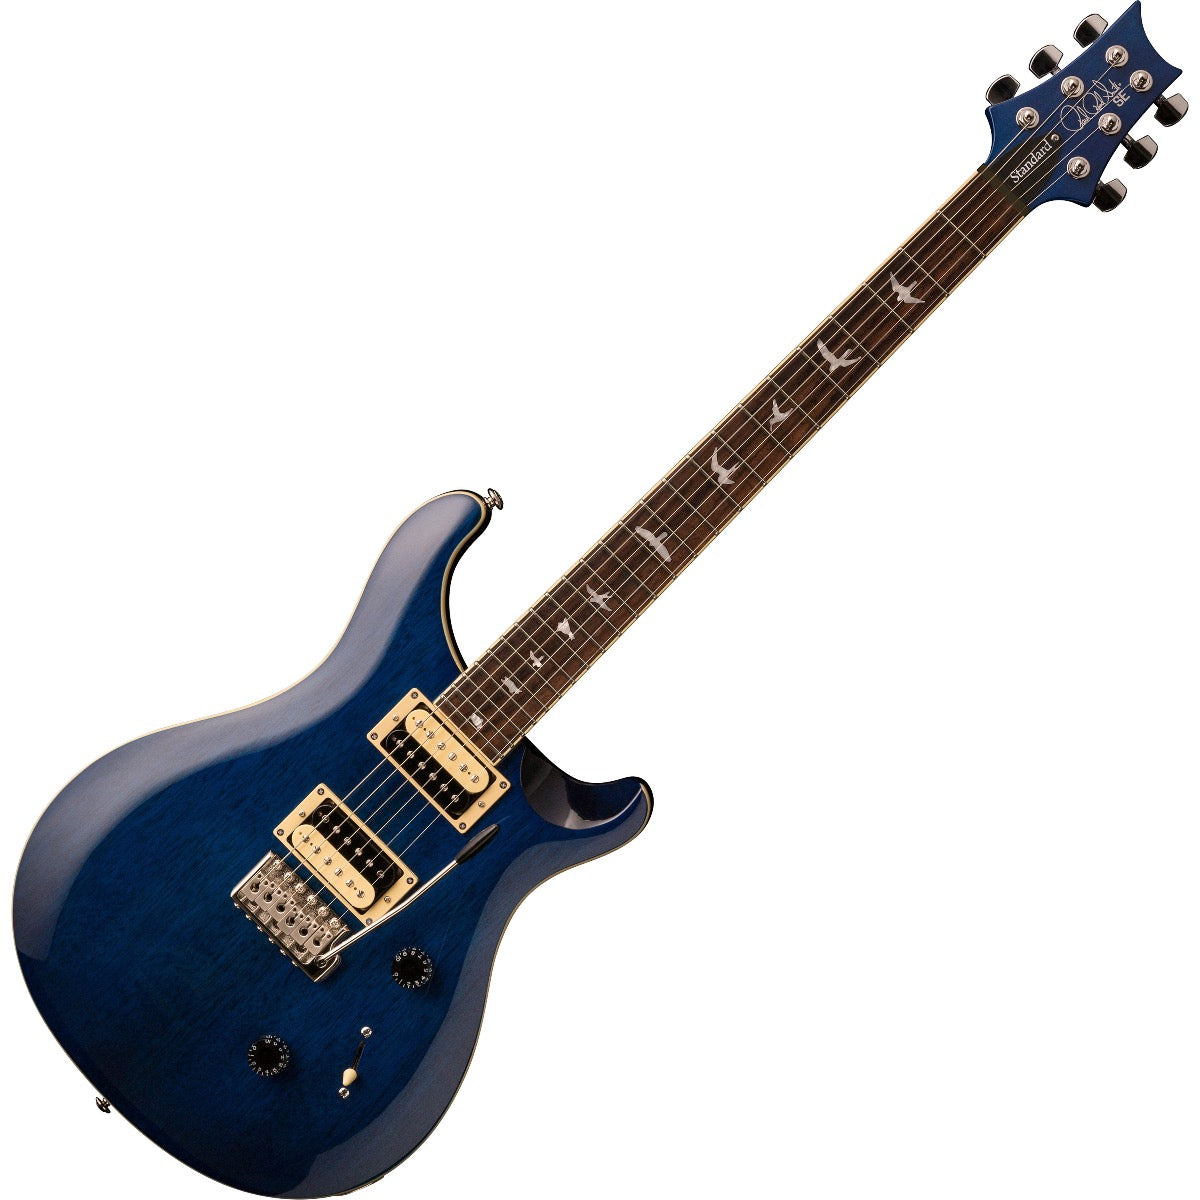 Top view of PRS SE Standard 24 Electric Guitar - Translucent Blue